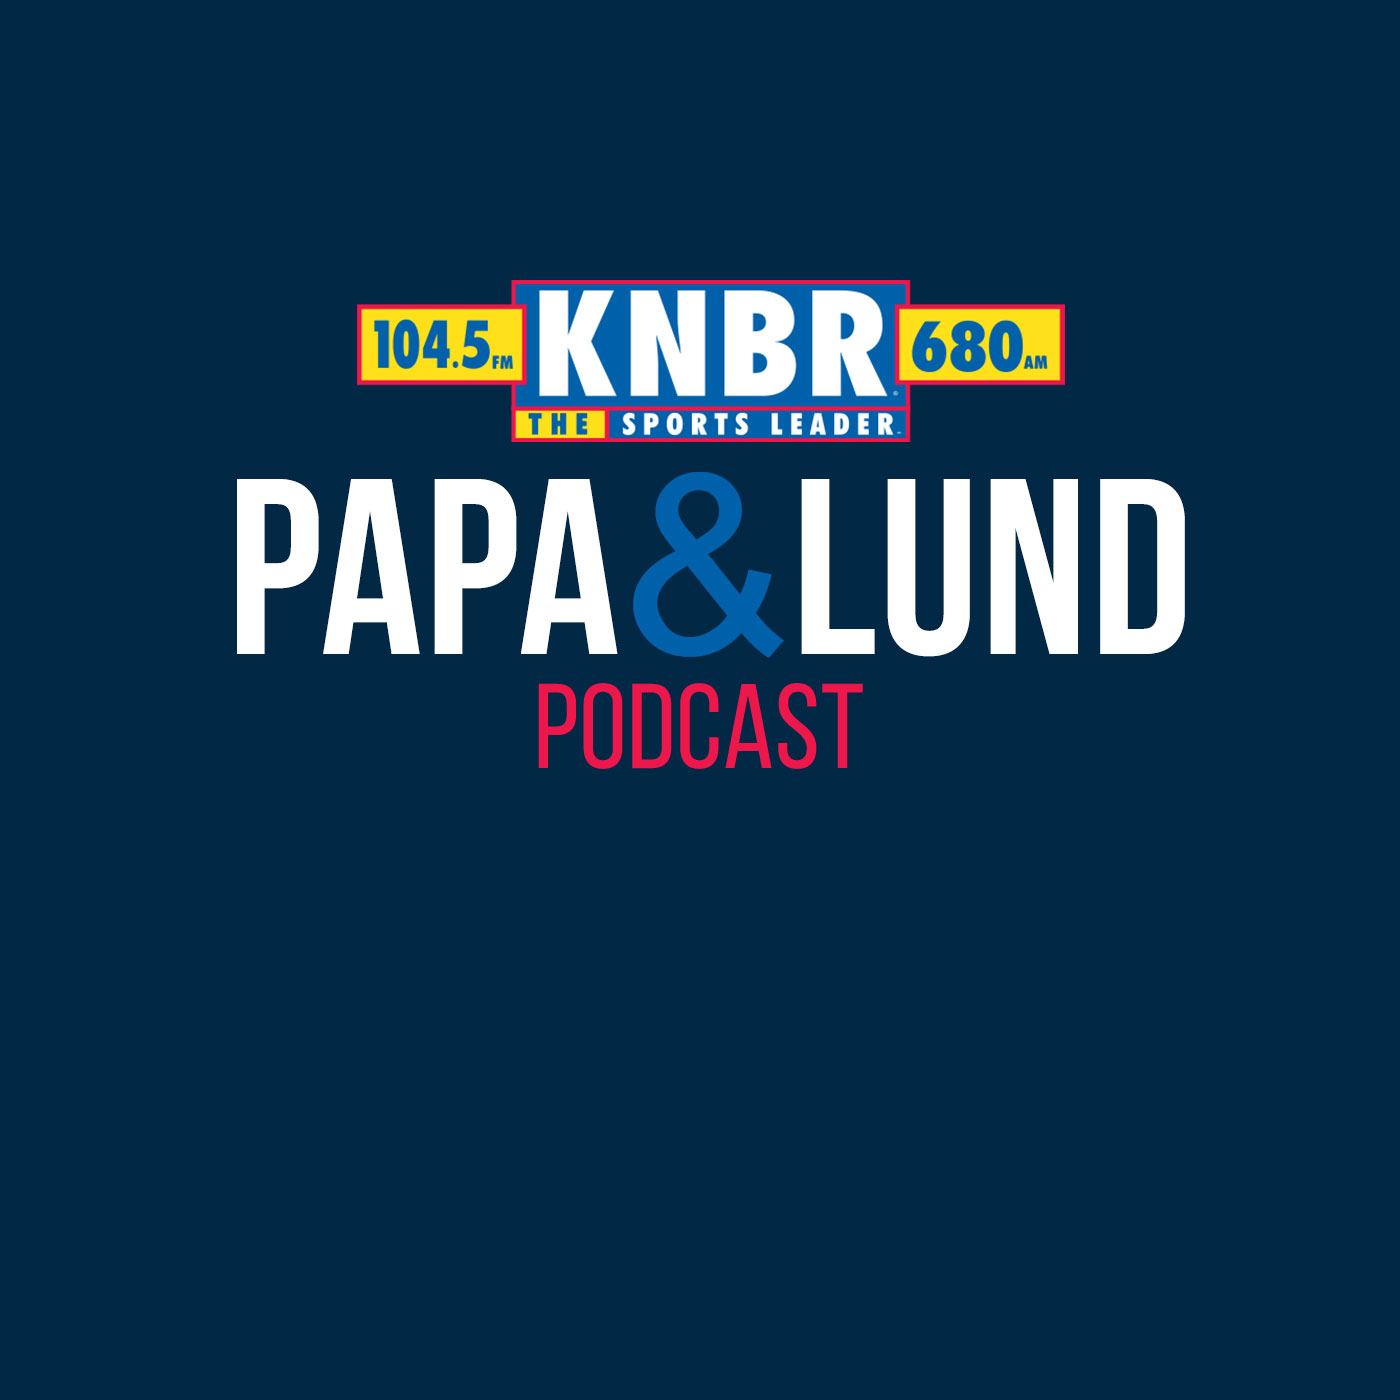 10-23 Kevin Harlan joins Papa & Lund to take a look around the NFL before previewing the conclusion of Week 7 with the 49ers and Vikings on Monday Night